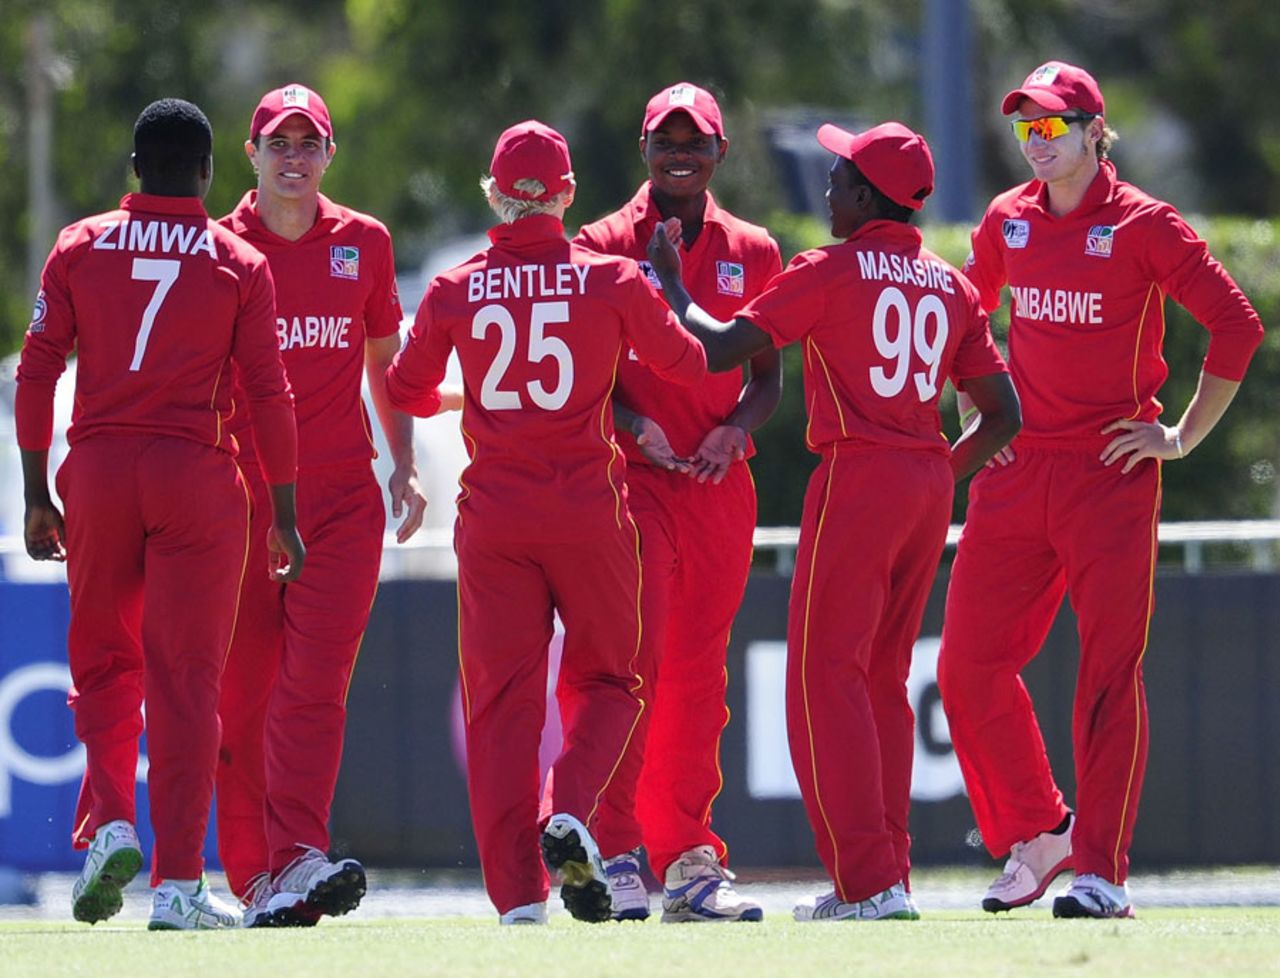 Zimbabwe's fielders celebrate an India dismissal, India v Zimbabwe, Group C, ICC Under-19 World Cup 2012, Townsville, August 14, 2012